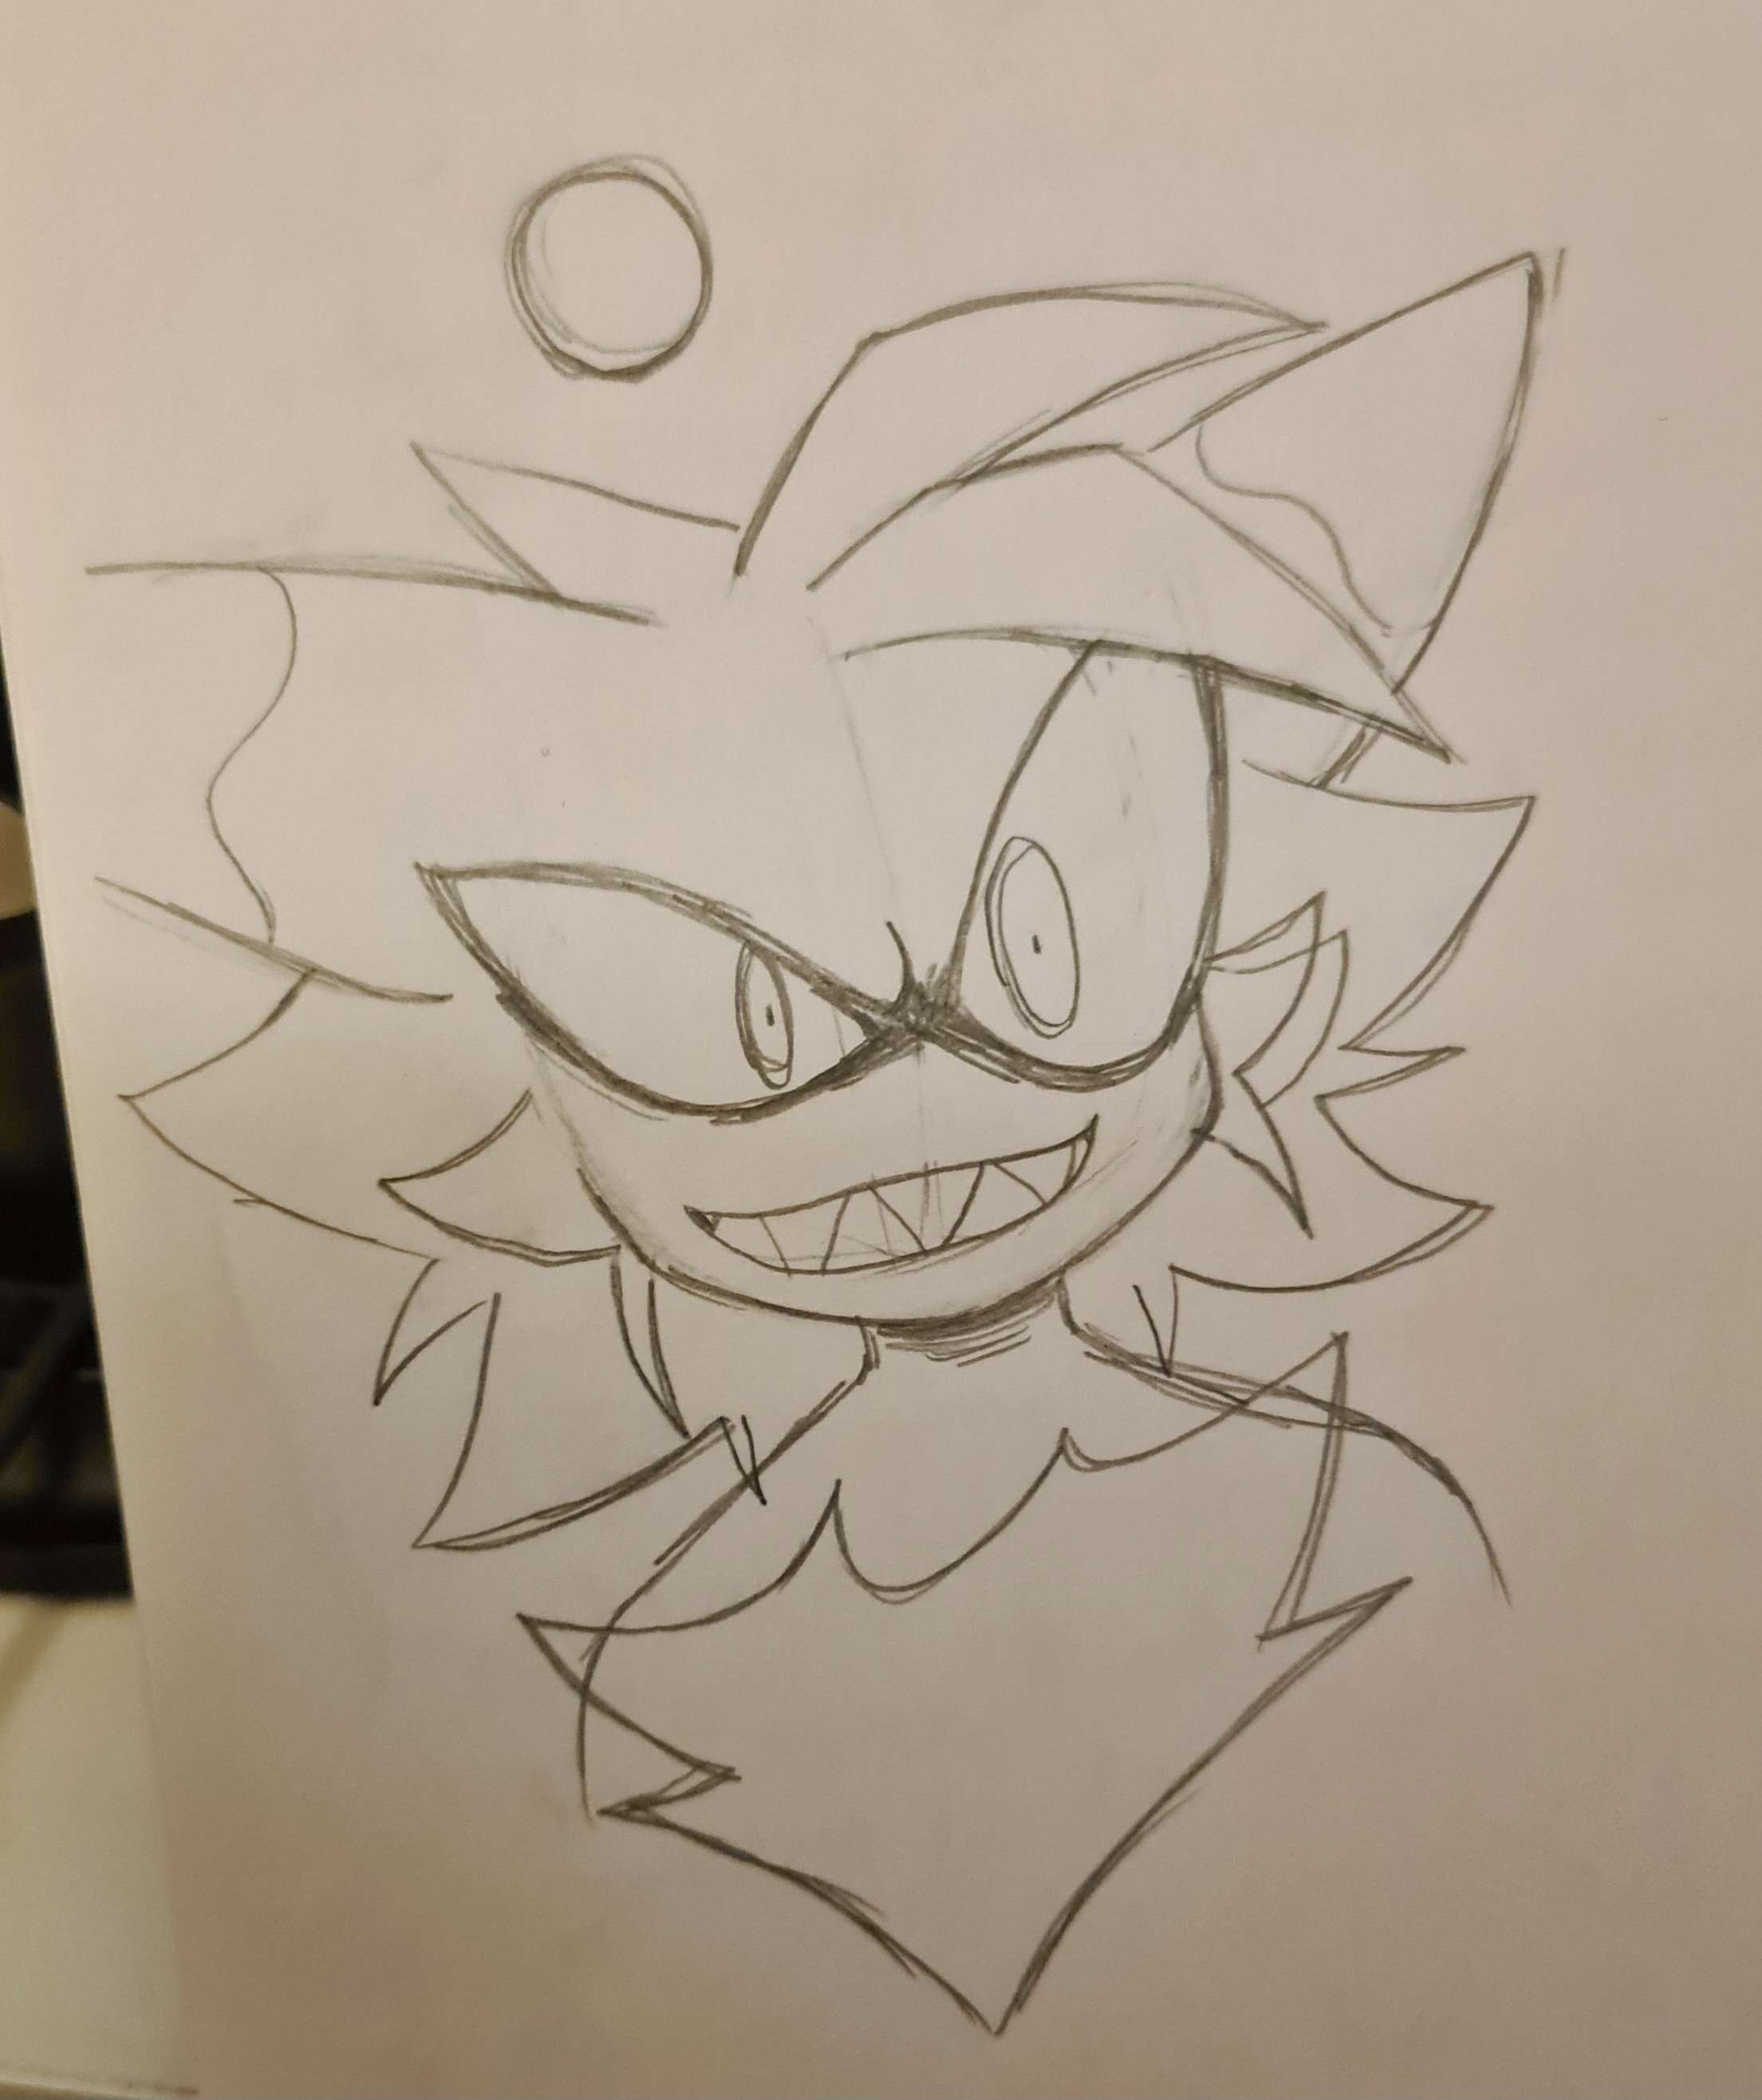 pencil sketch of smudge grinning